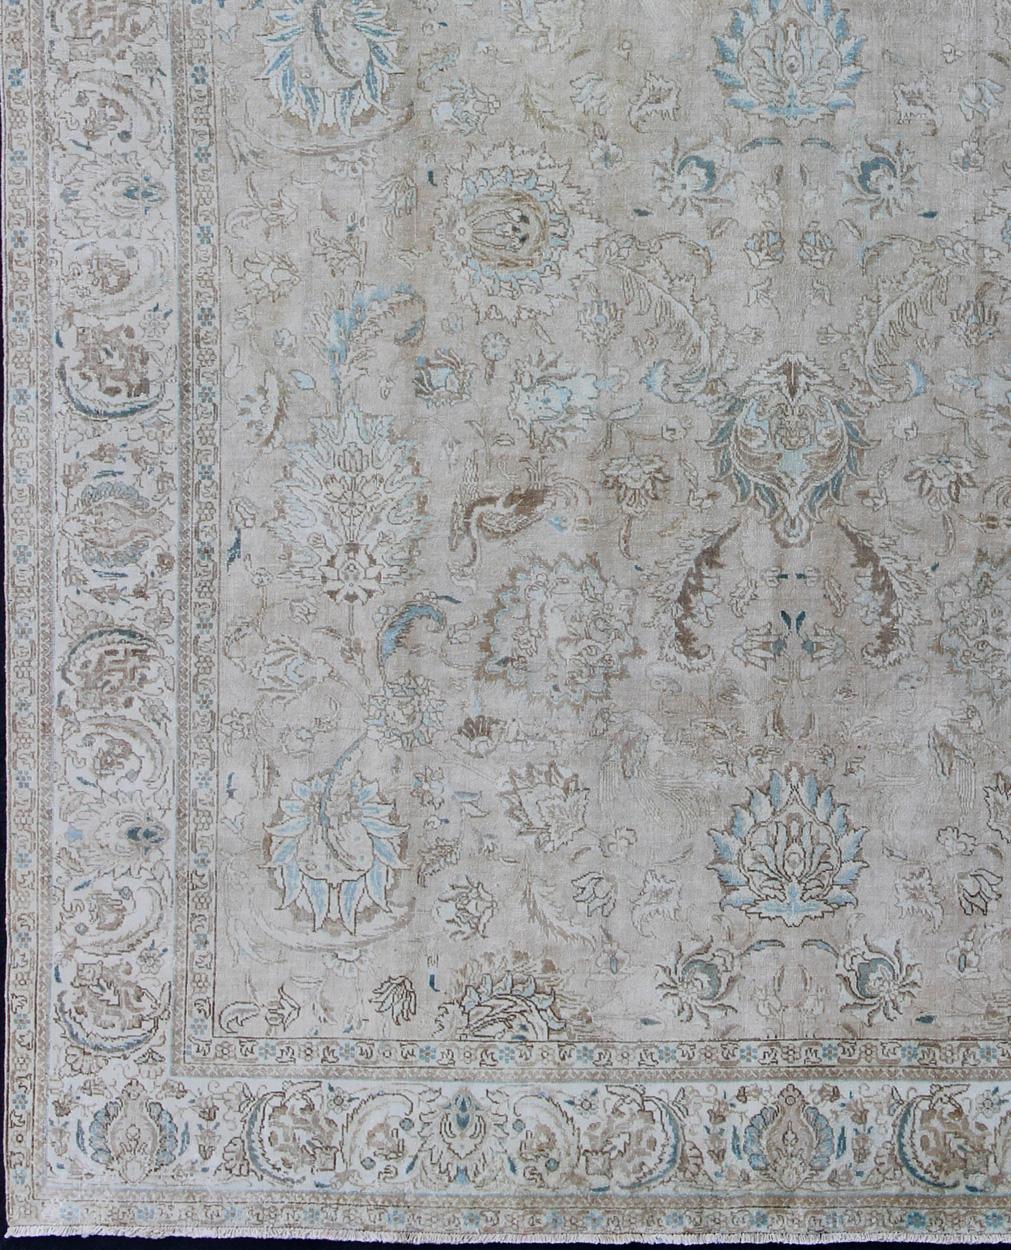 Muted gray, blue, and ivory vintage Persian Tabriz rug with floral design, hd-tra, country of origin / type: Iran / Tabriz, circa 1950

This vintage Persian Tabriz carpet (circa mid-20th century) features both muted and faded colors and a medallion